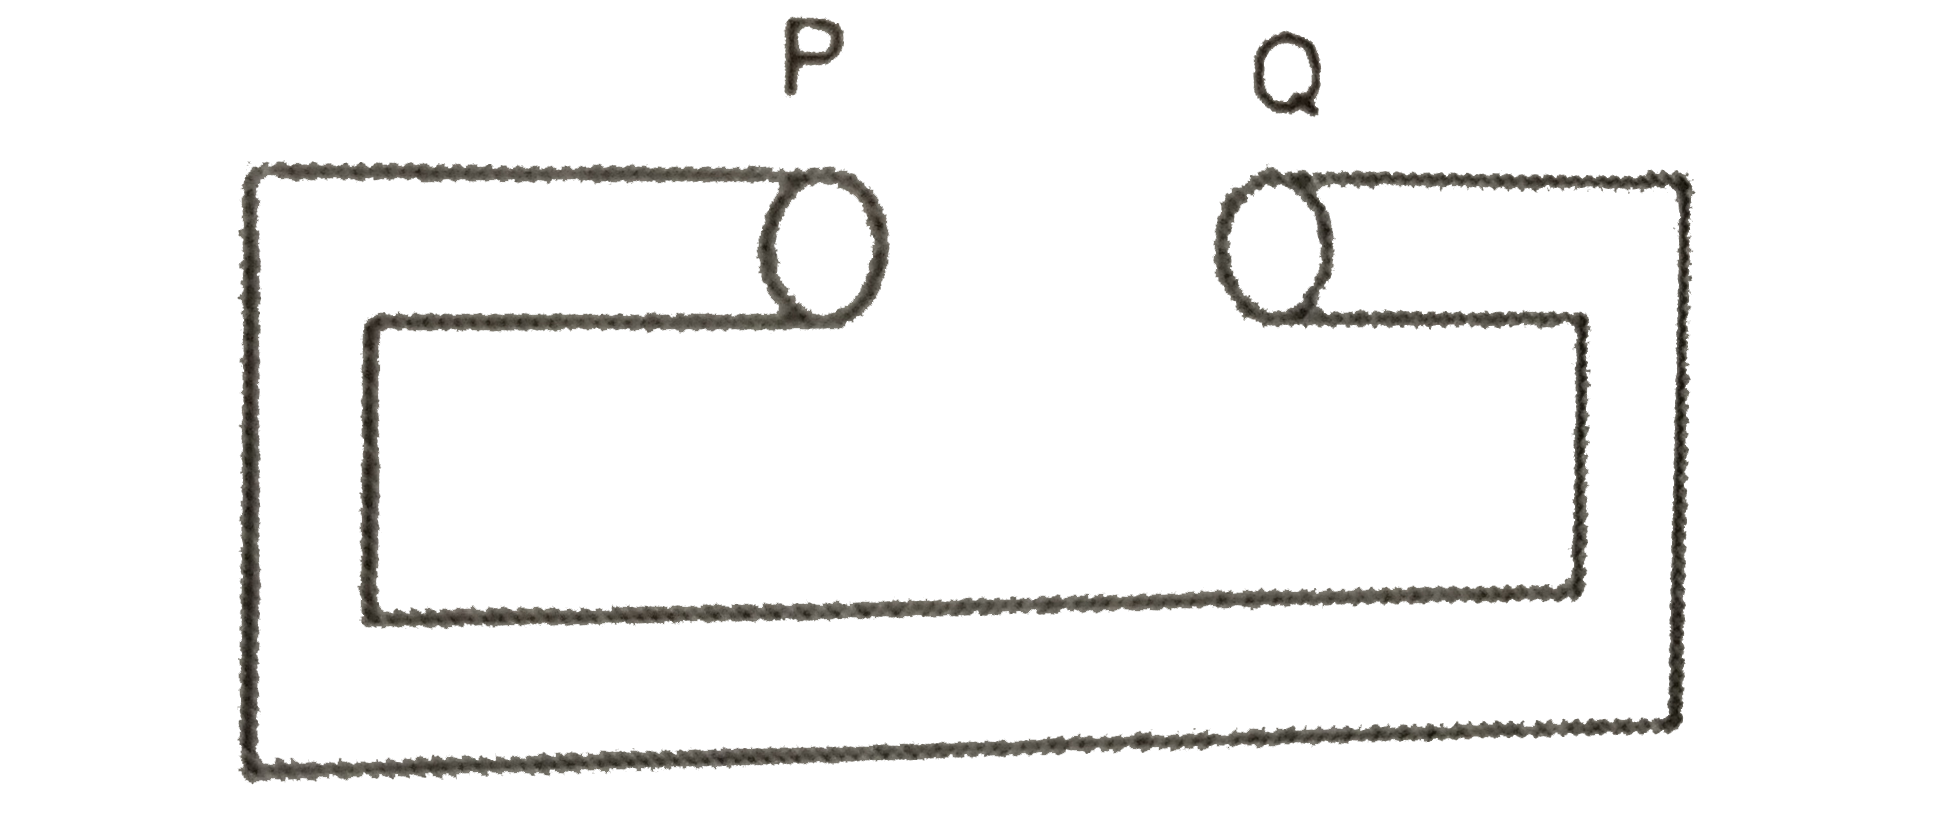 A metallic rod is bent in the form of ractangle as shown in the given figure and heated .Then the gap between the ends P and Q